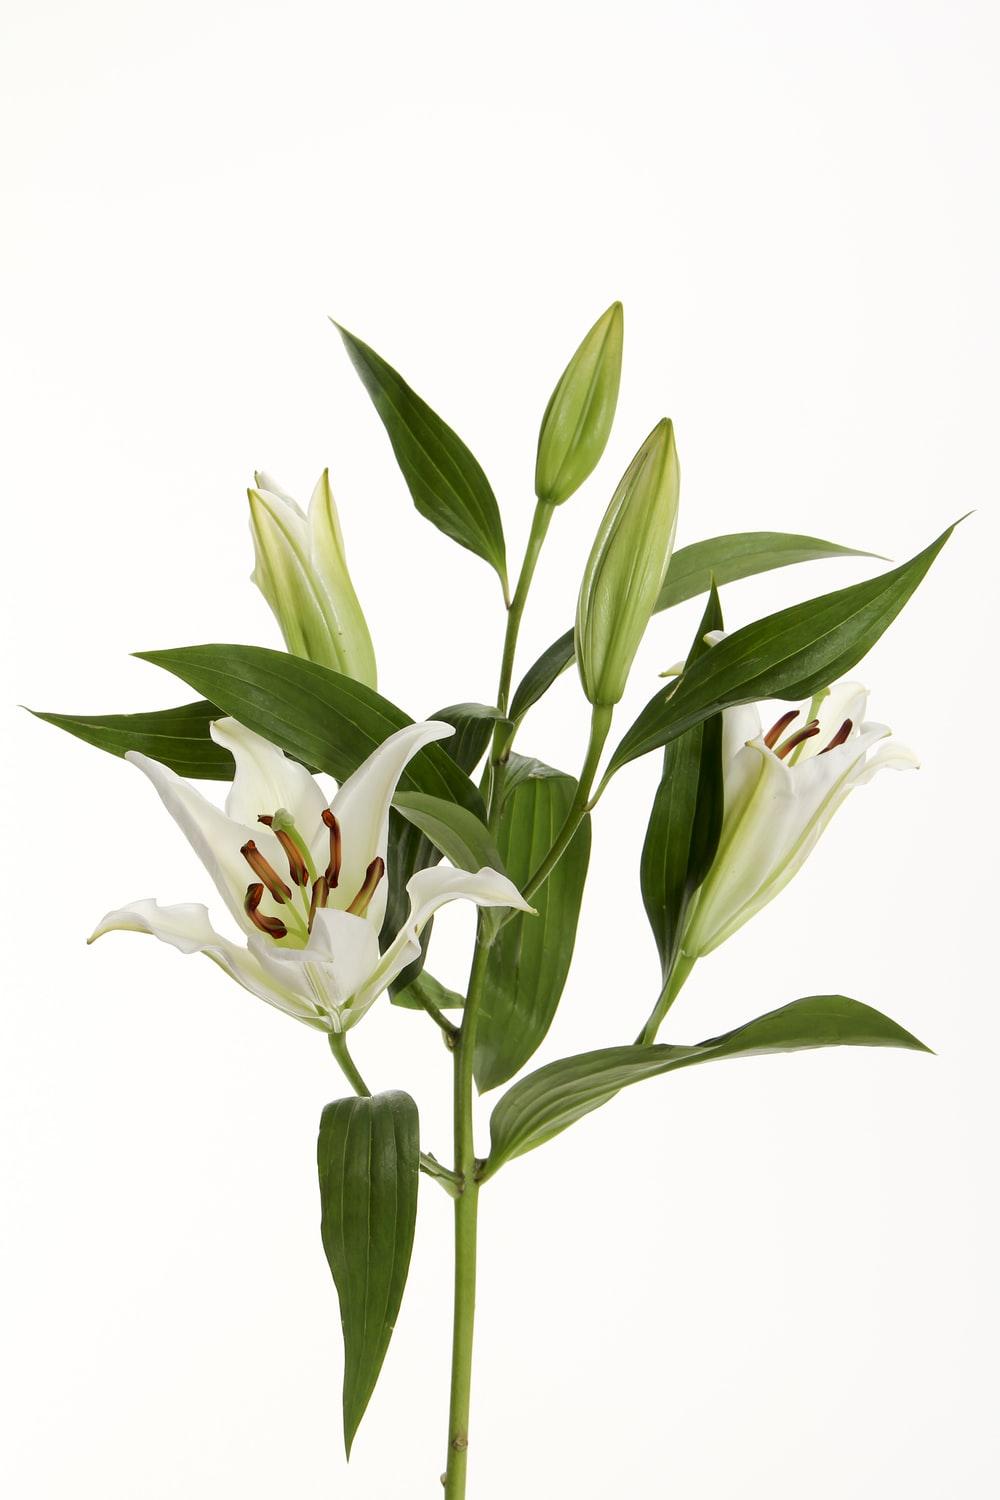 Lily Picture. Download Free Image